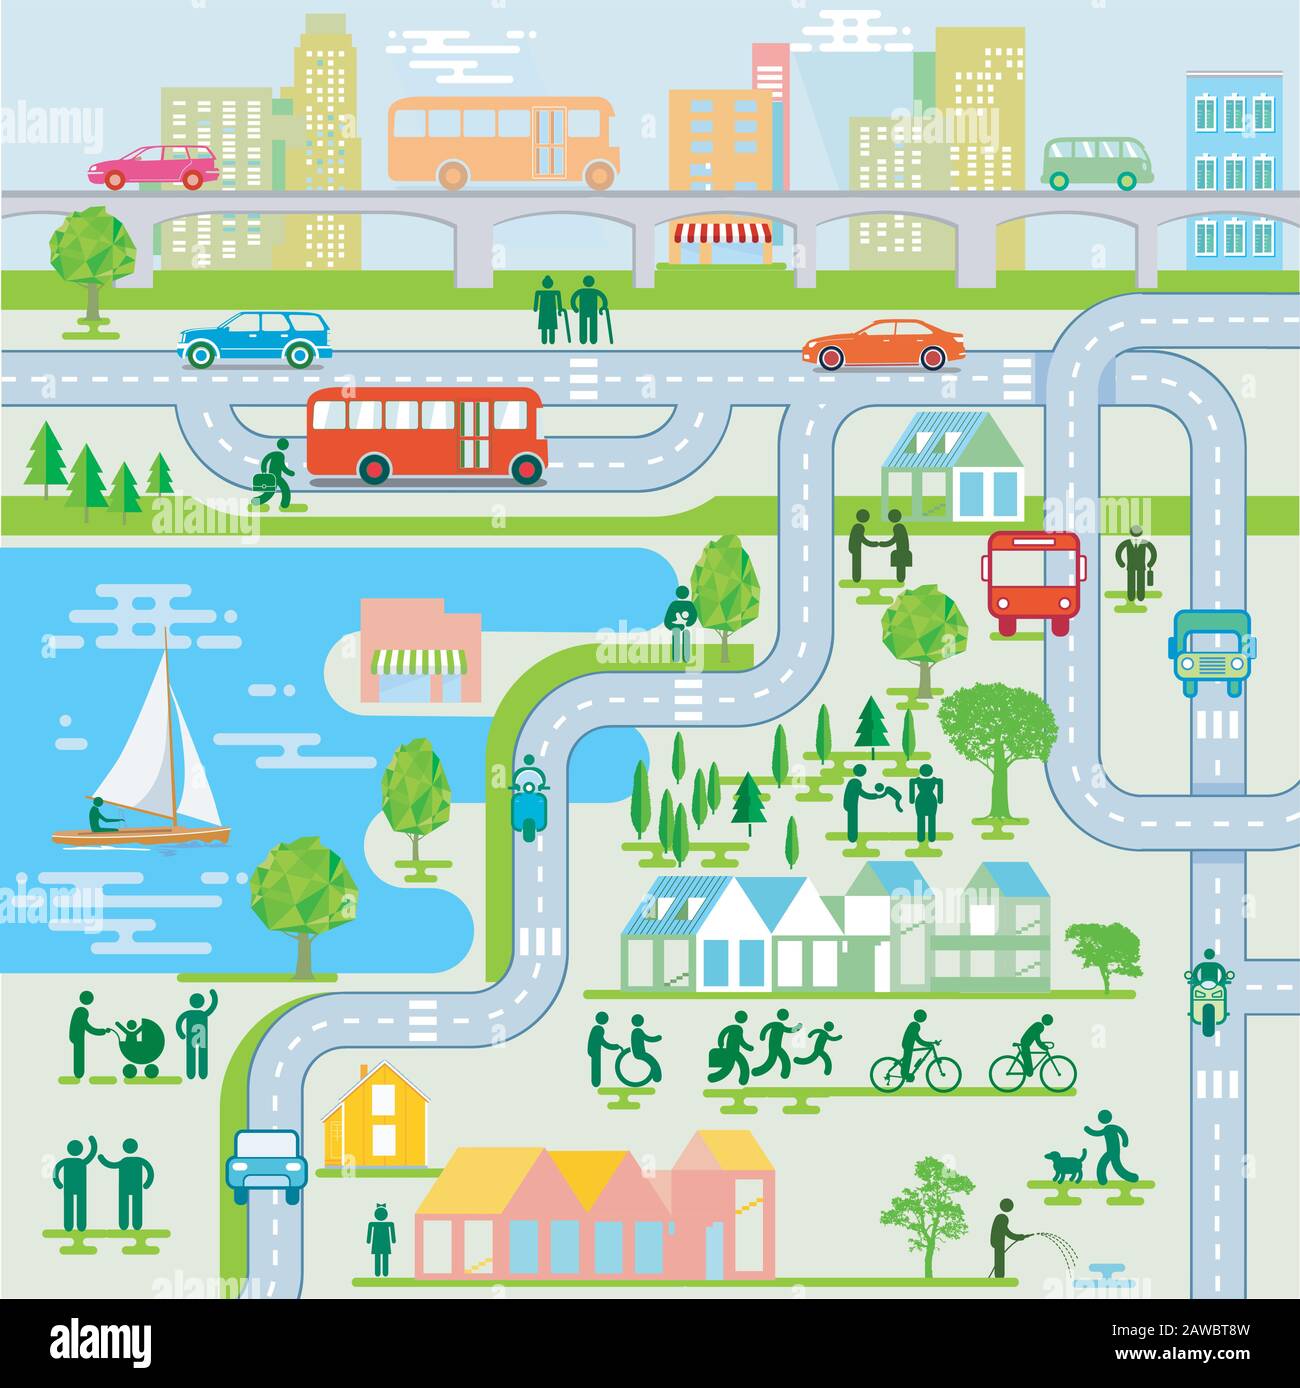 City with pedestrians and public transport Stock Vector